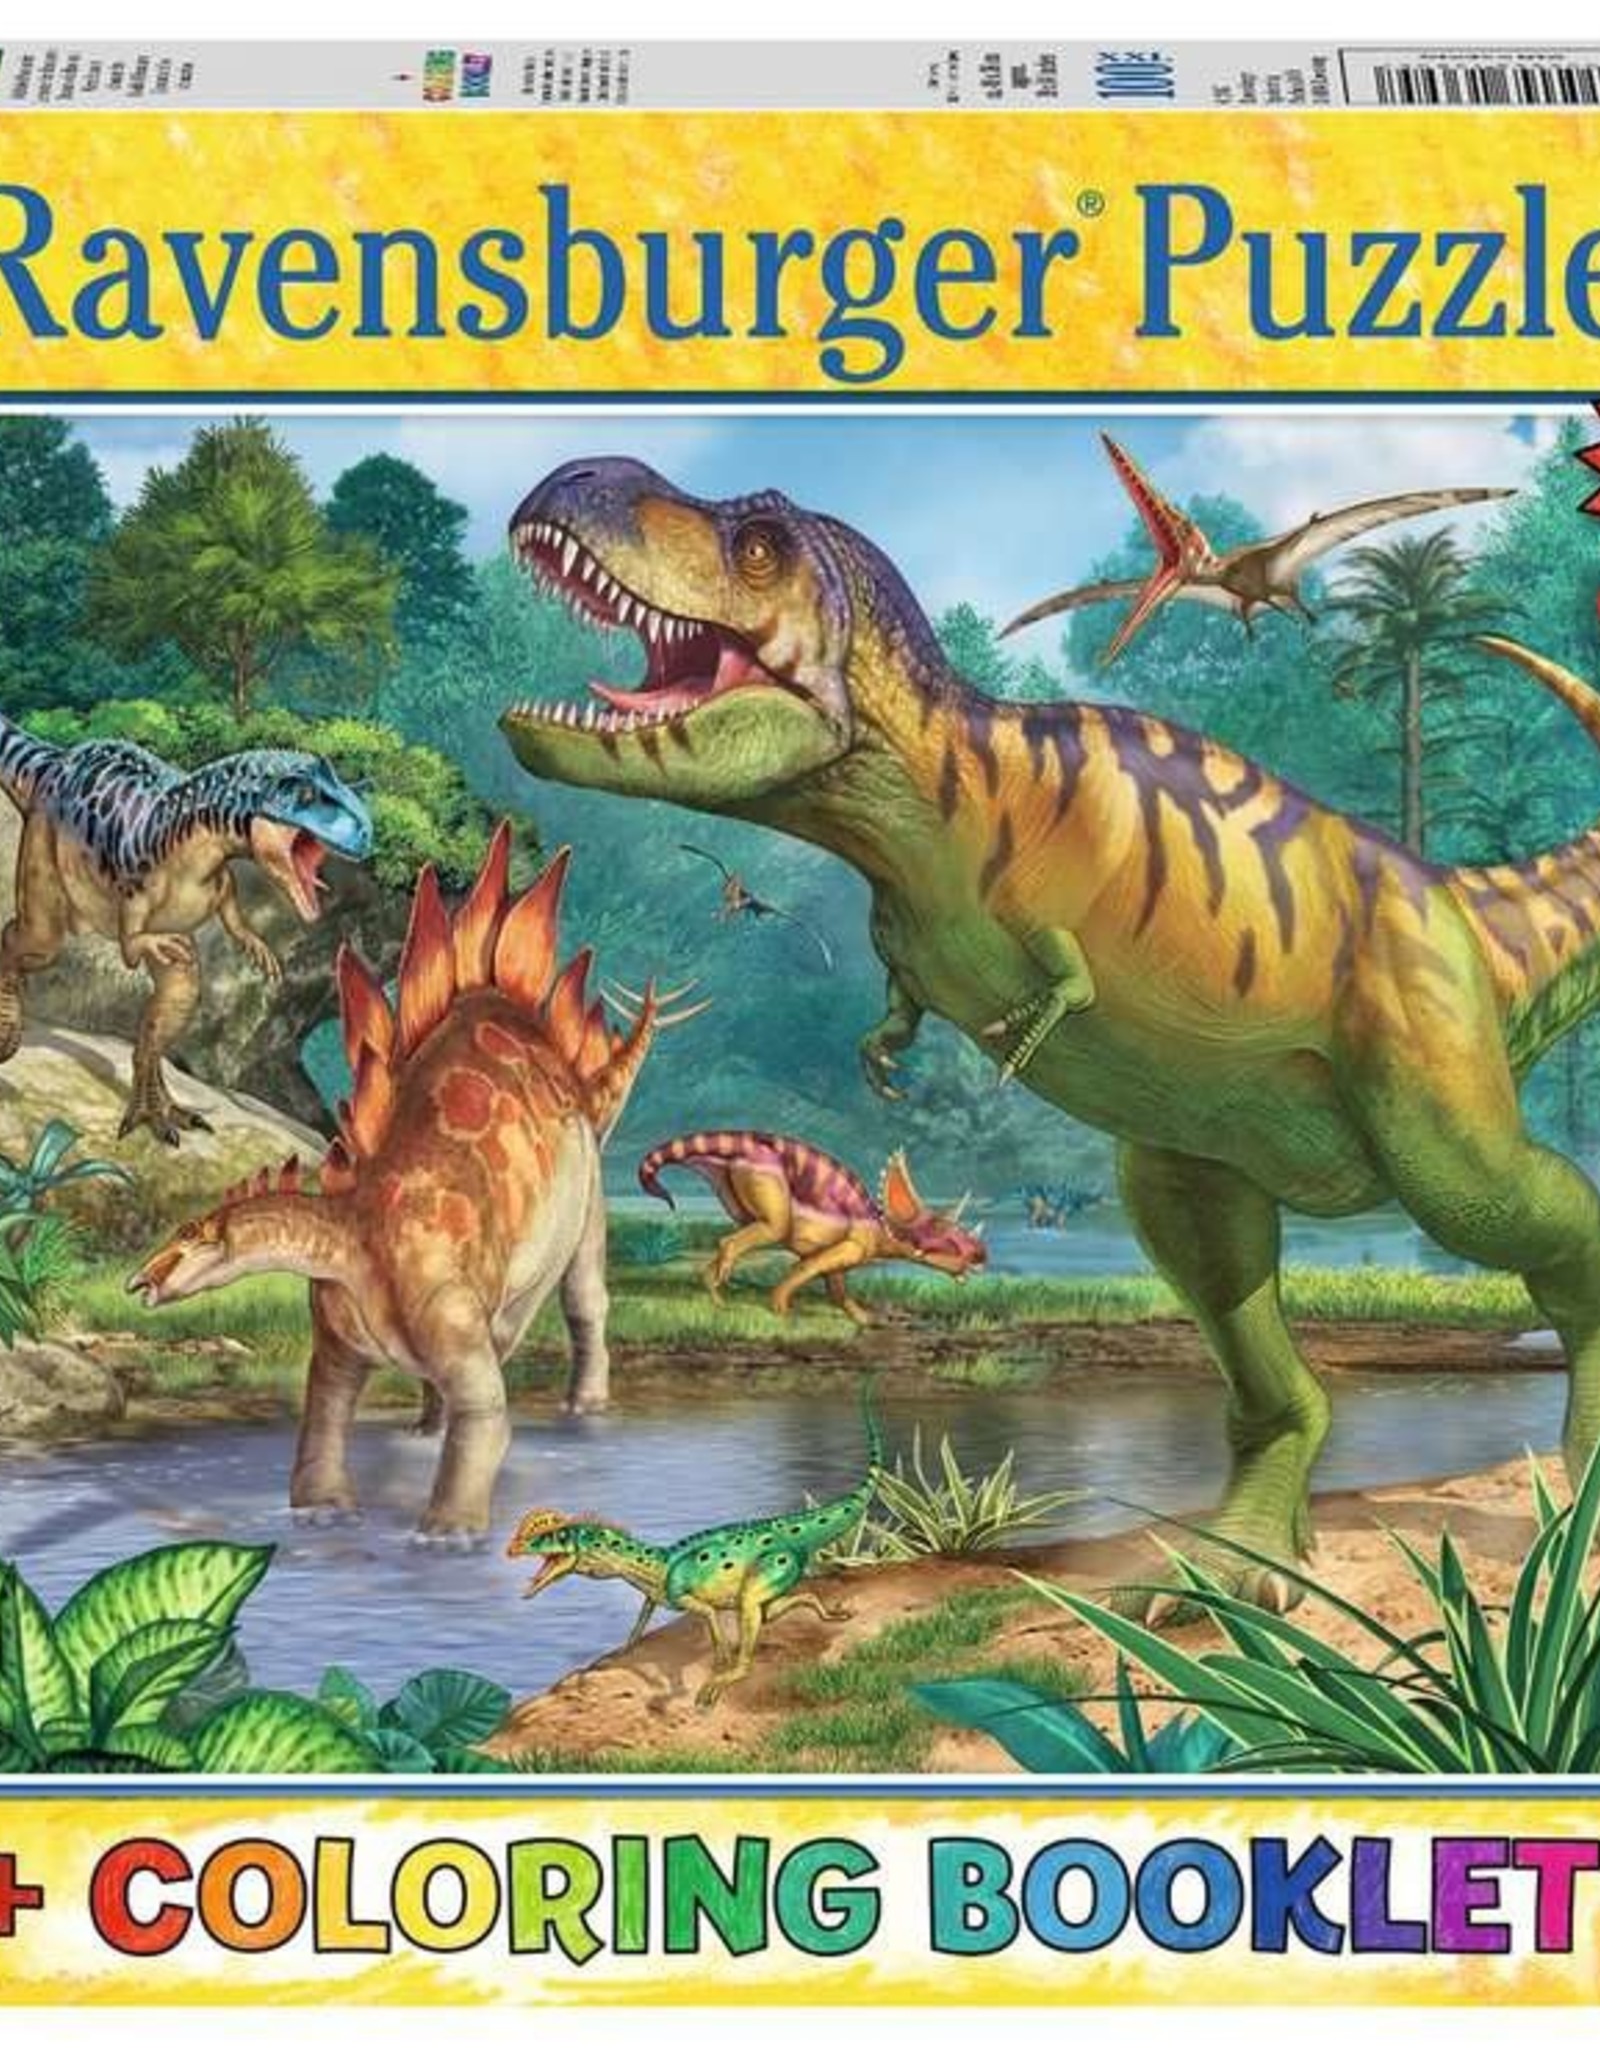 Ravensburger Puzzle 100 pc + Coloring Book: World of Dinosours